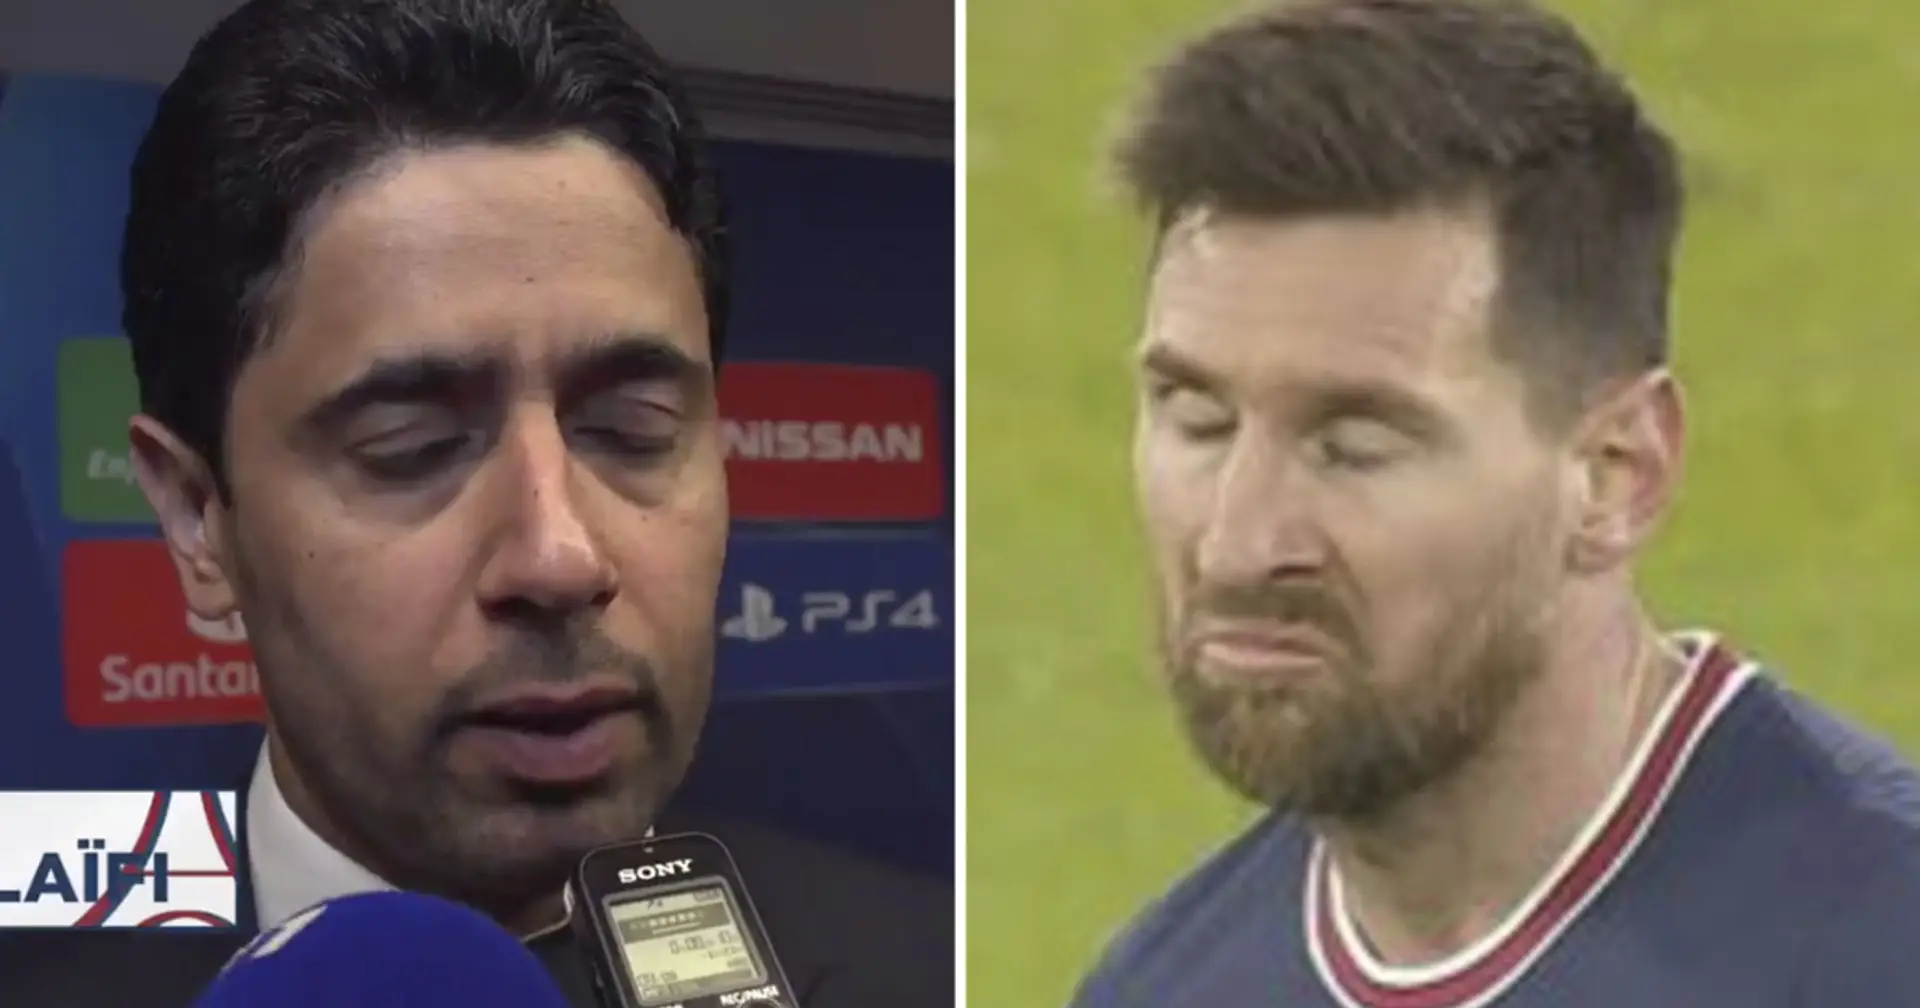 One thing Messi's entourage dislike about PSG revealed by reporters